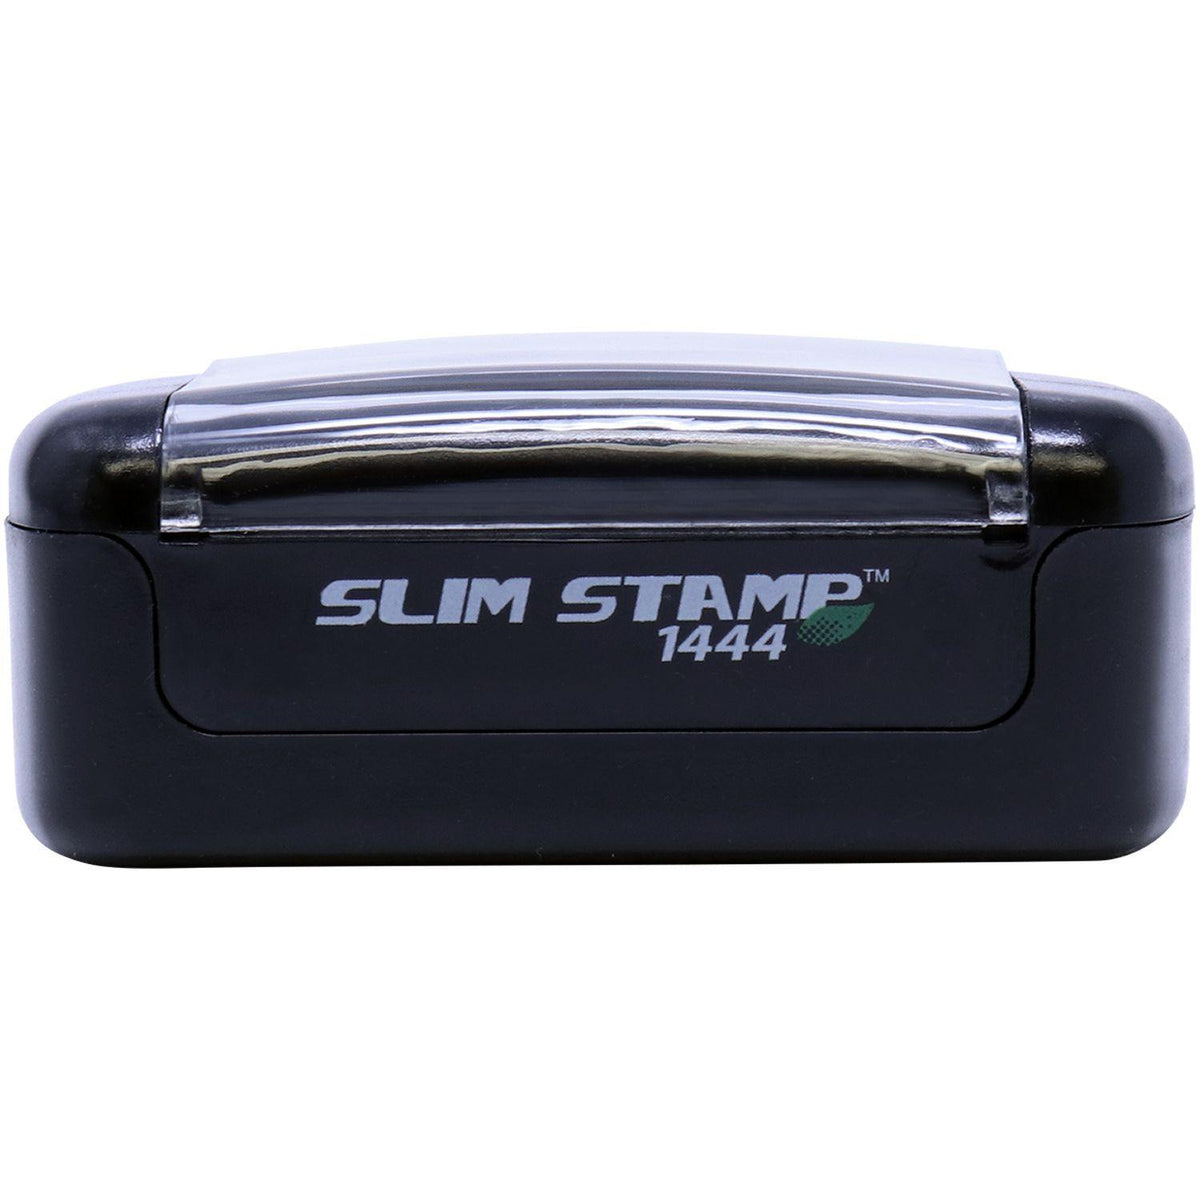 Slim Pre Inked Chart Thinned On Stamp - Engineer Seal Stamps - Brand_Slim, Impression Size_Small, Stamp Type_Pre-Inked Stamp, Type of Use_Medical Office